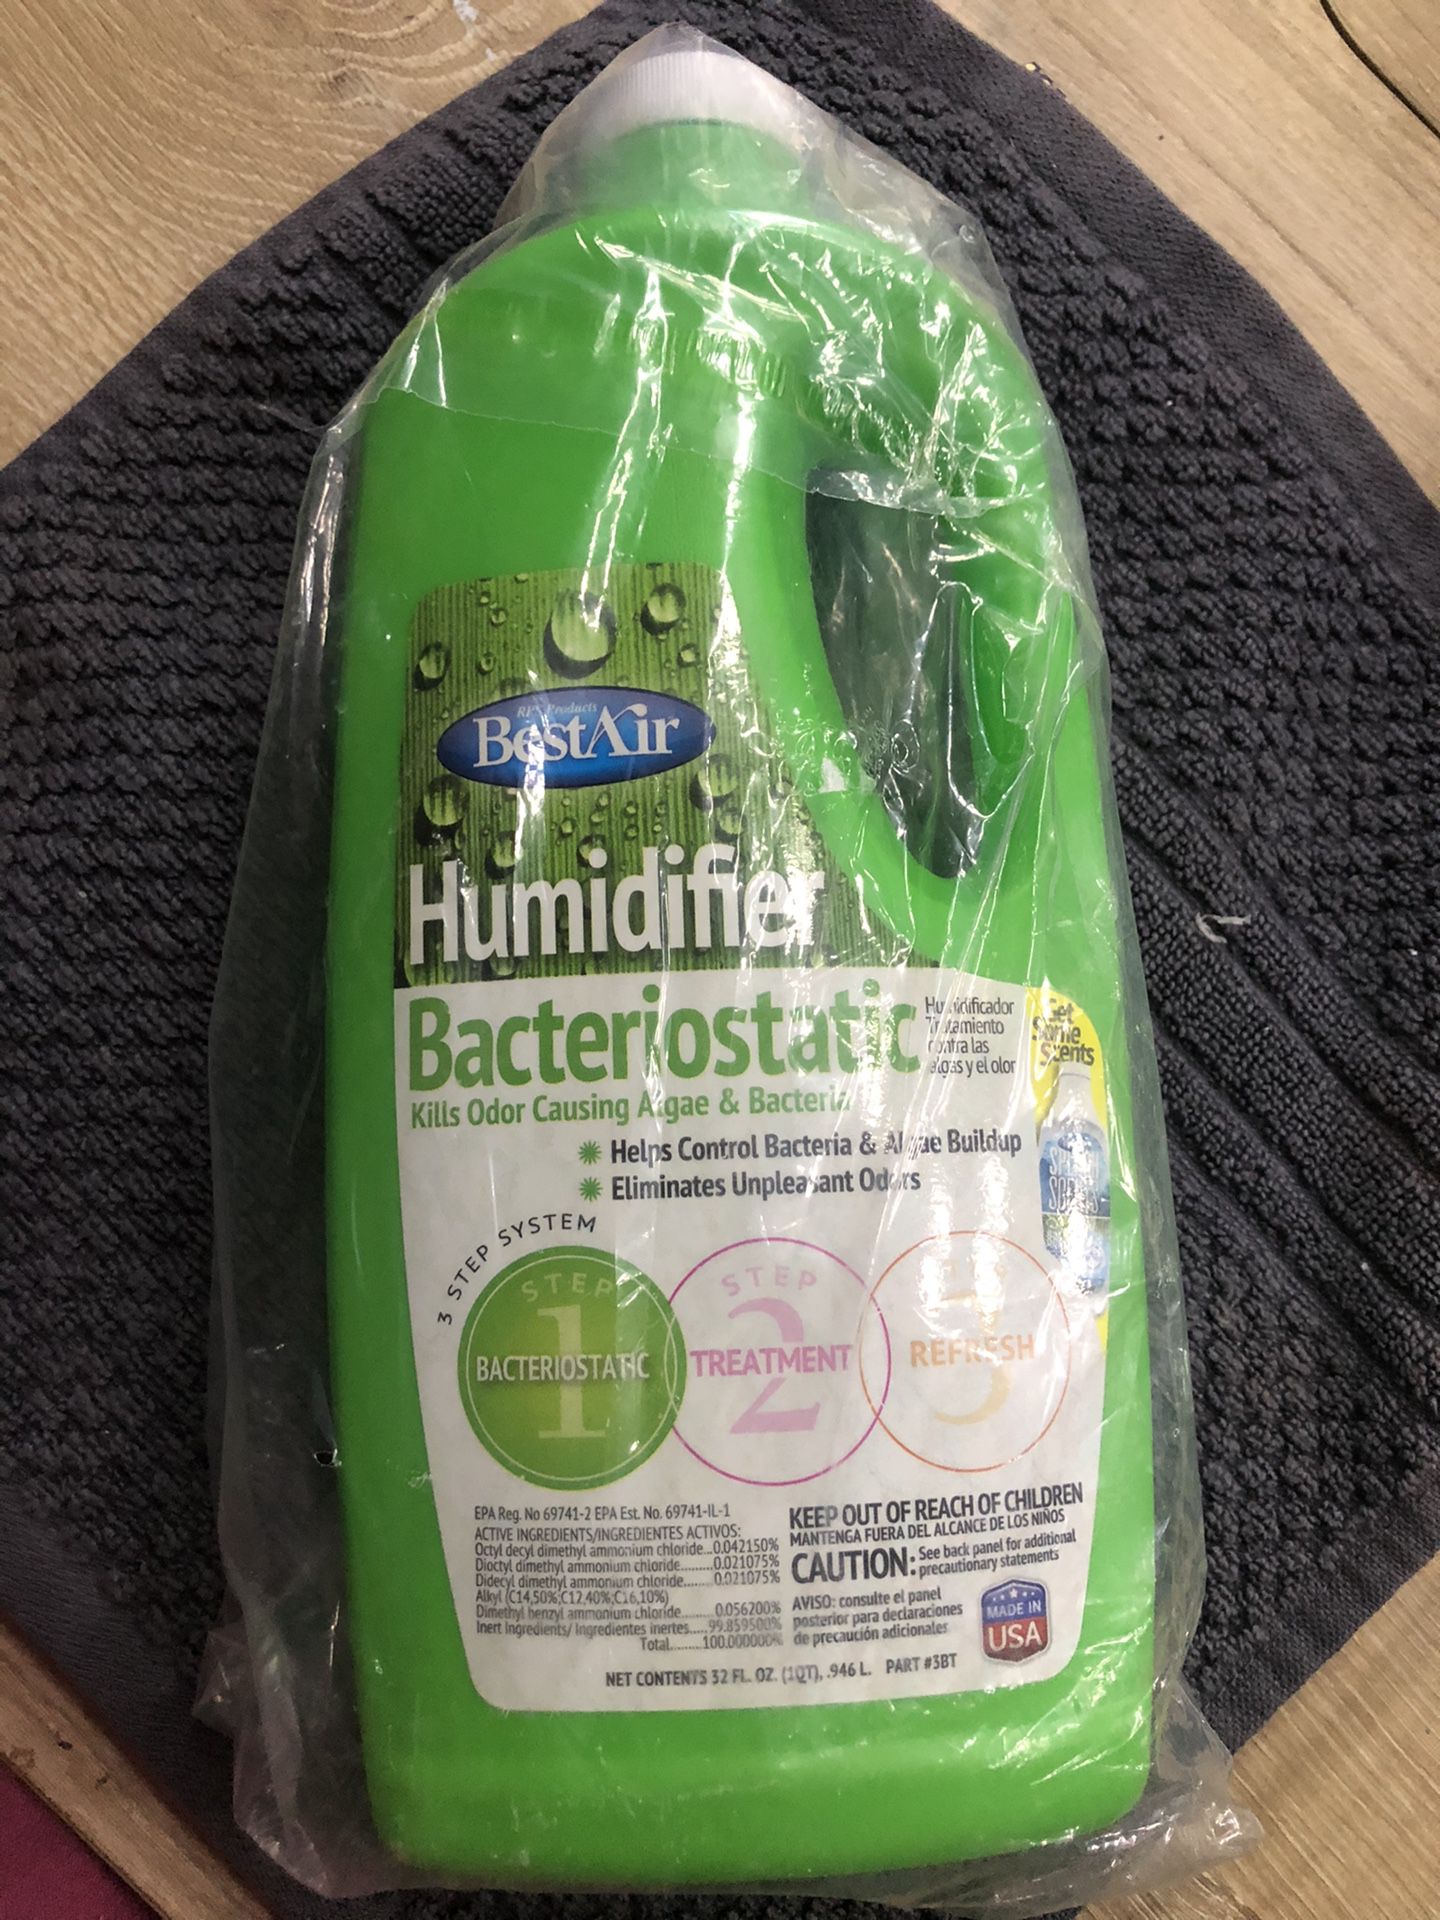 Humidifier bacteriostatic new only one